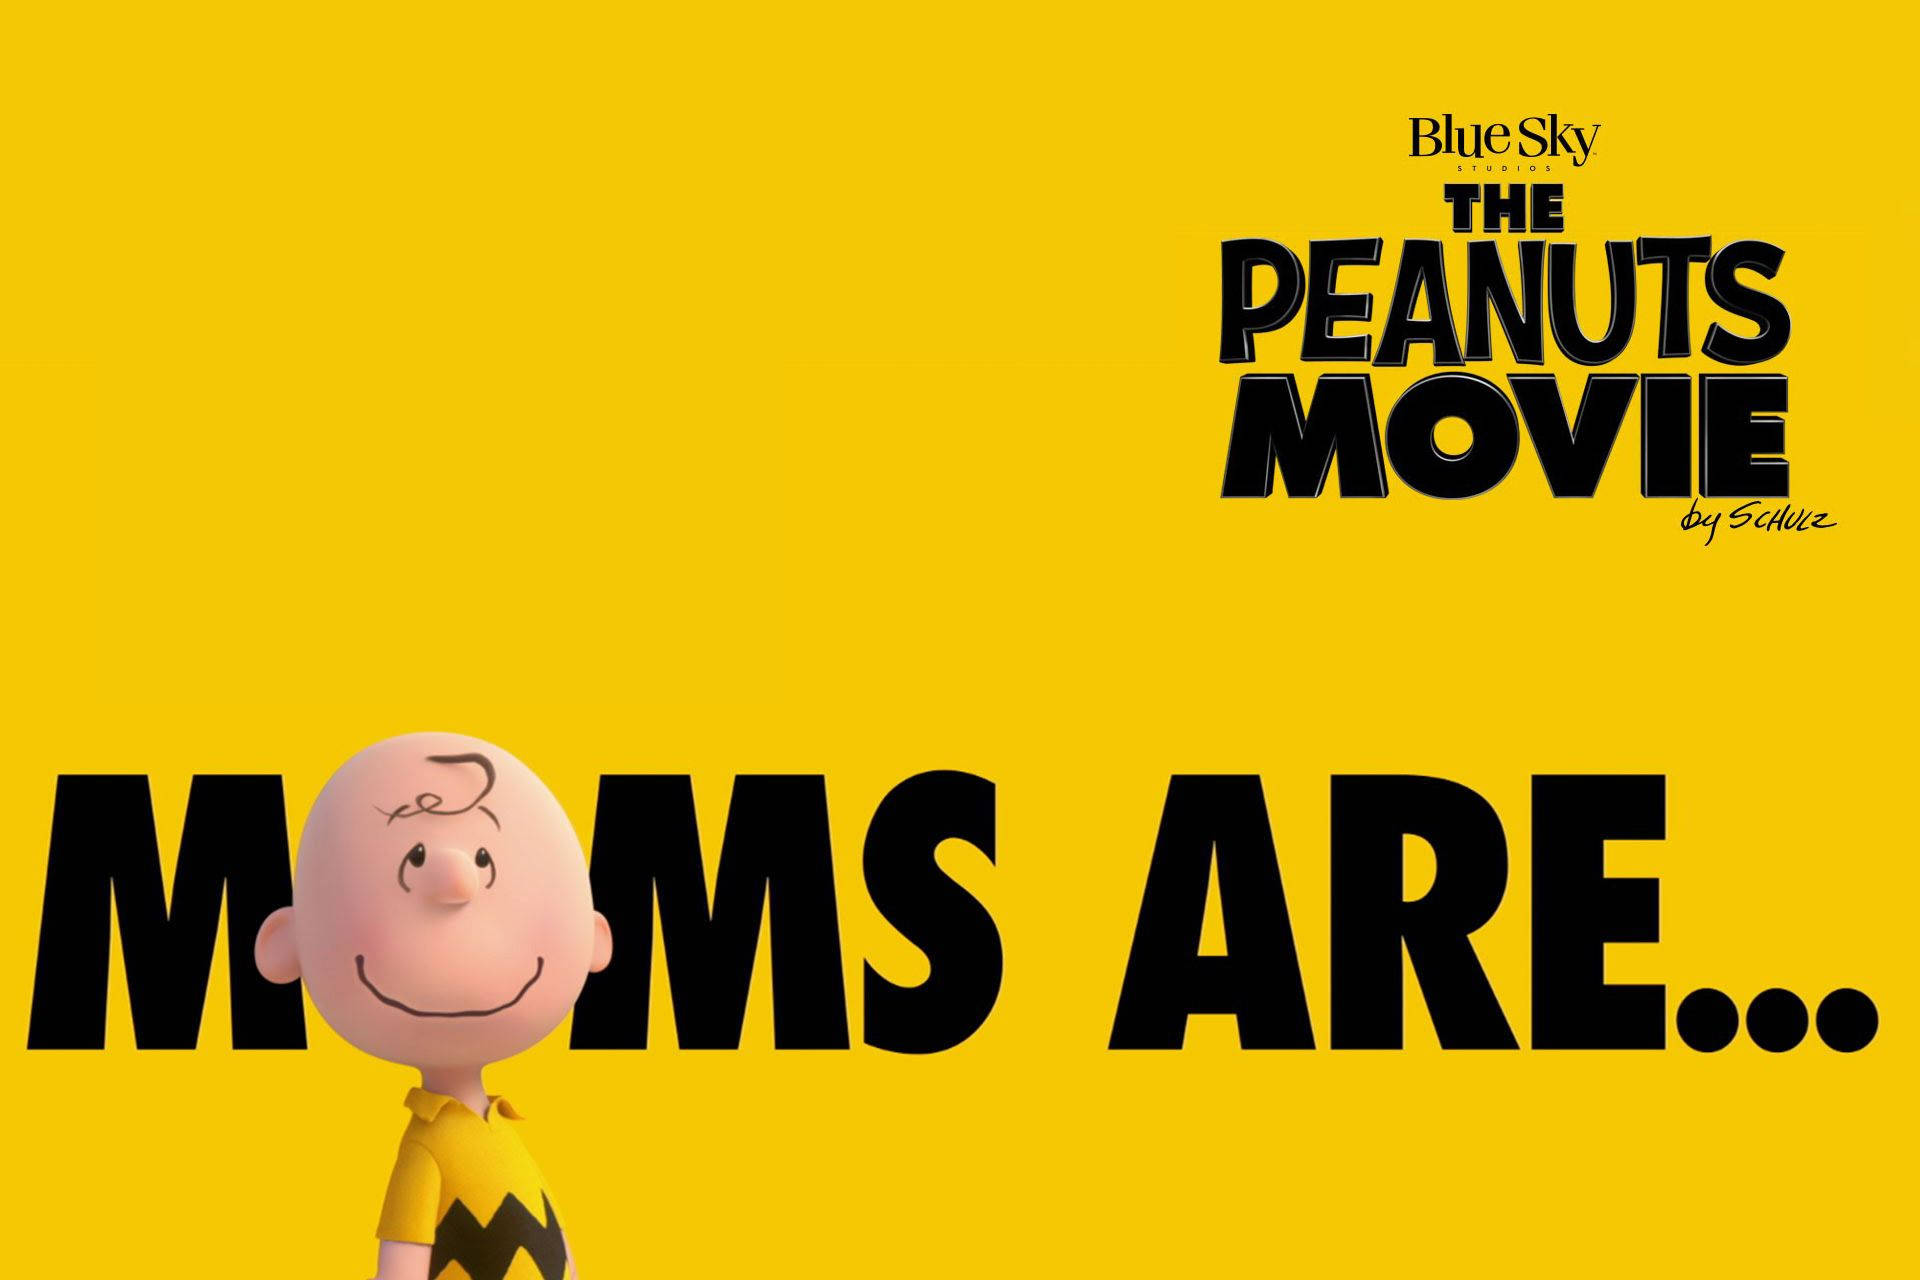 The Peanuts Movie "Moms Are..." Poster Wallpaper